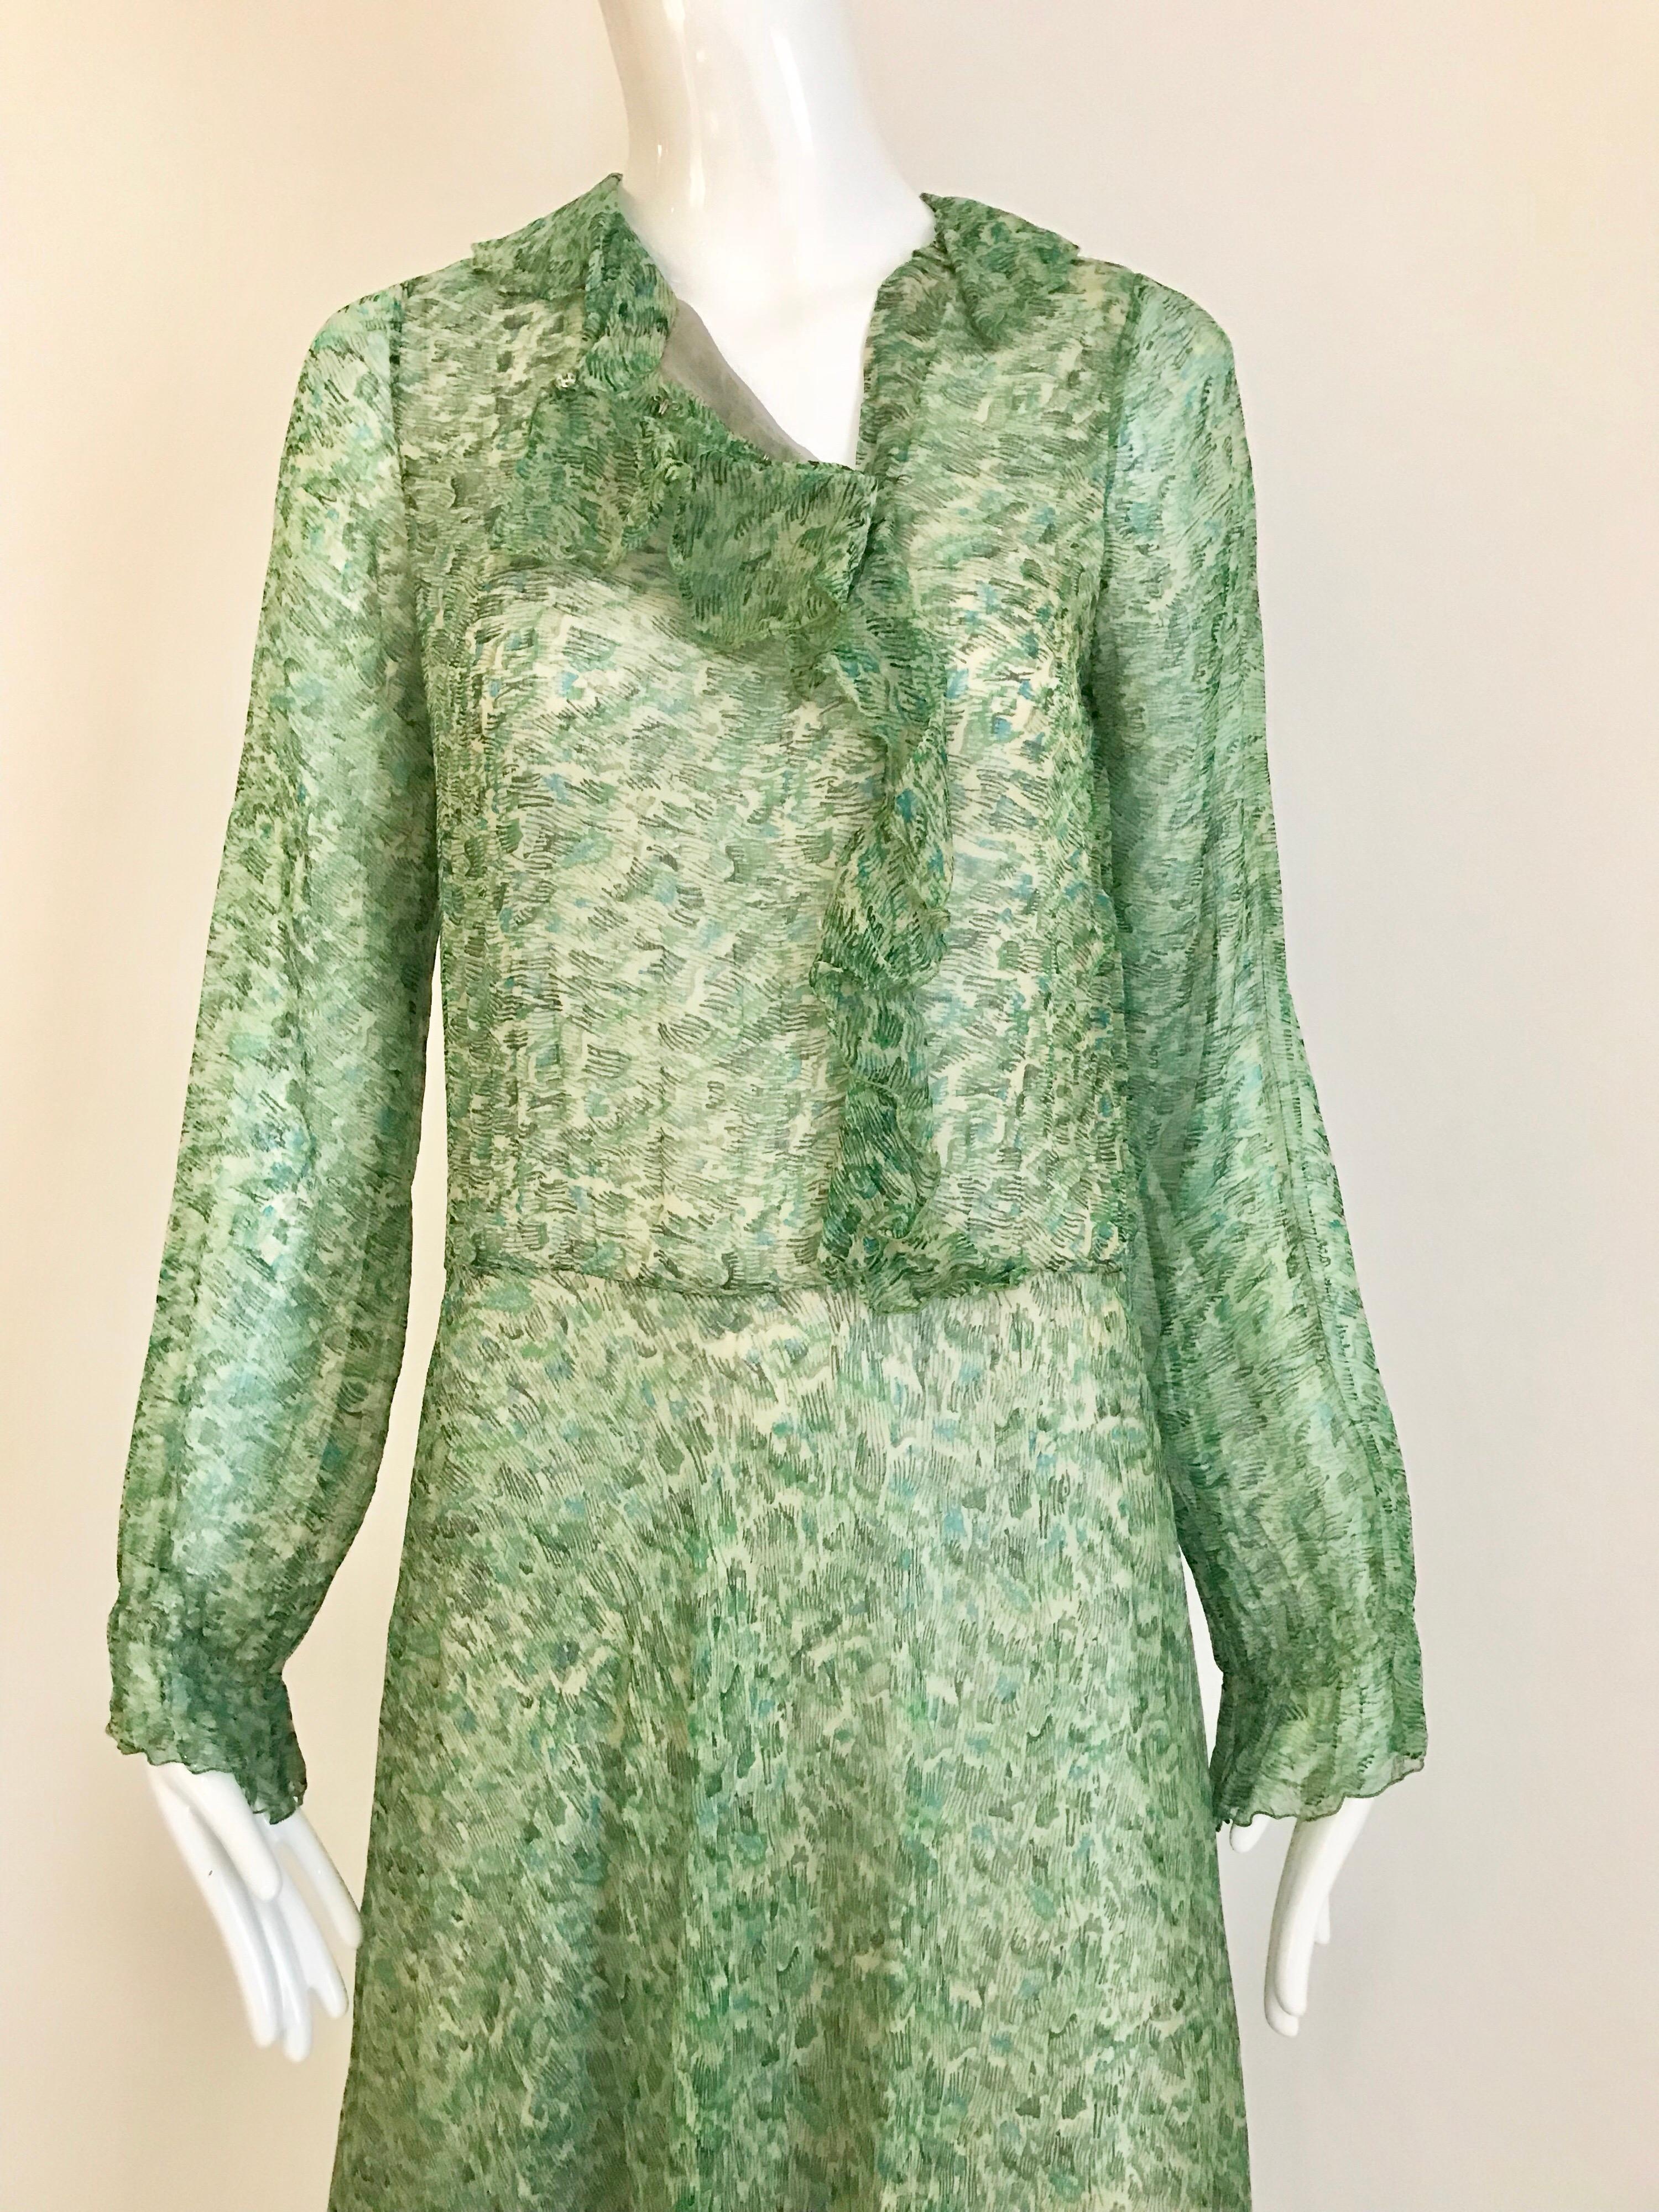 This Anna Weatherly green silk printed dress from the 1970’s has a gentle watercolor like hue and has a very traditional feeling.  Perfect for a daytime cocktail event.  Lovely.

Size: small - medium
Bust: 36 inches